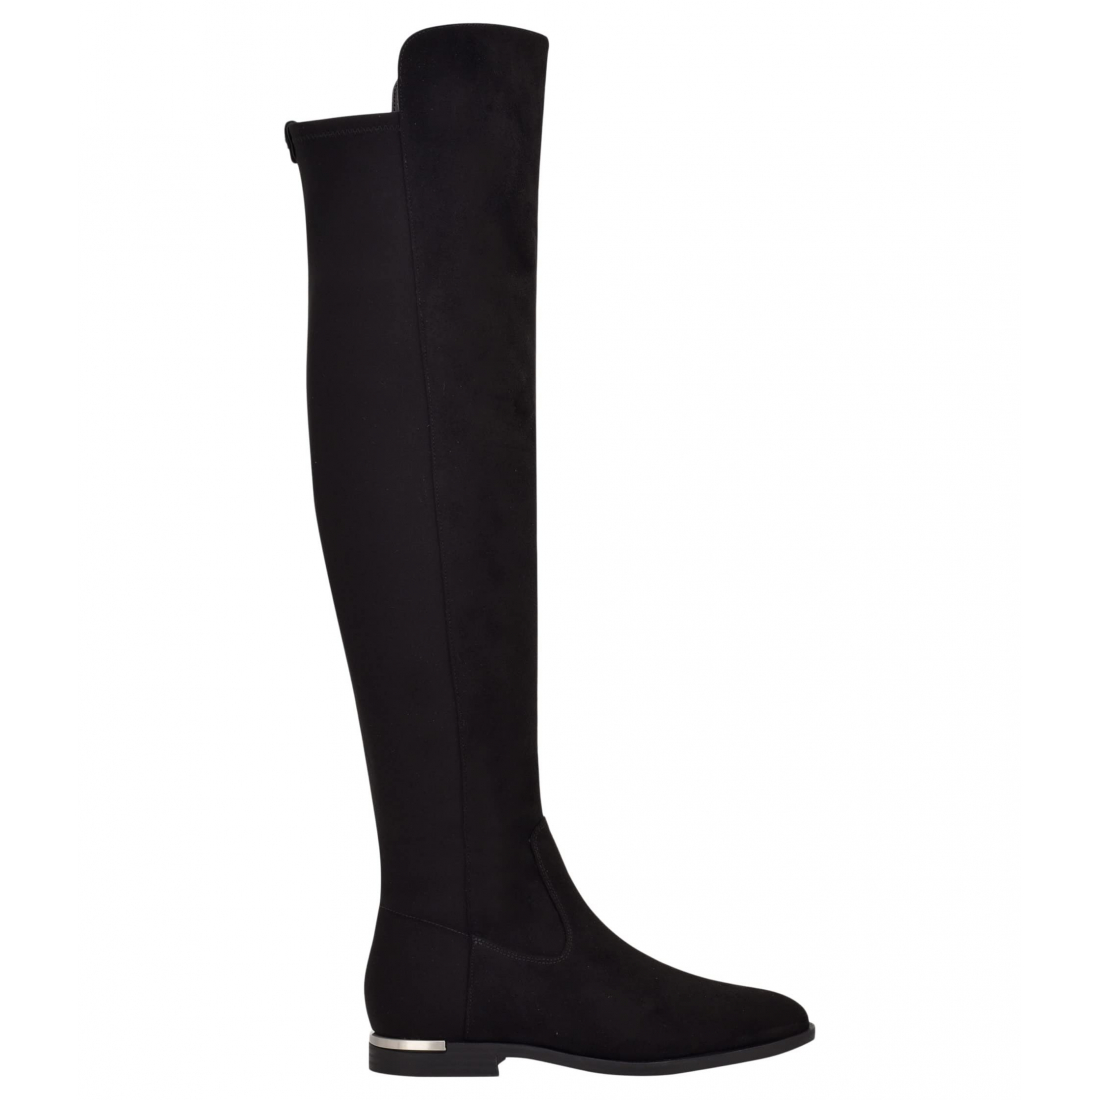 Women's 'Rania 2' Over the knee boots